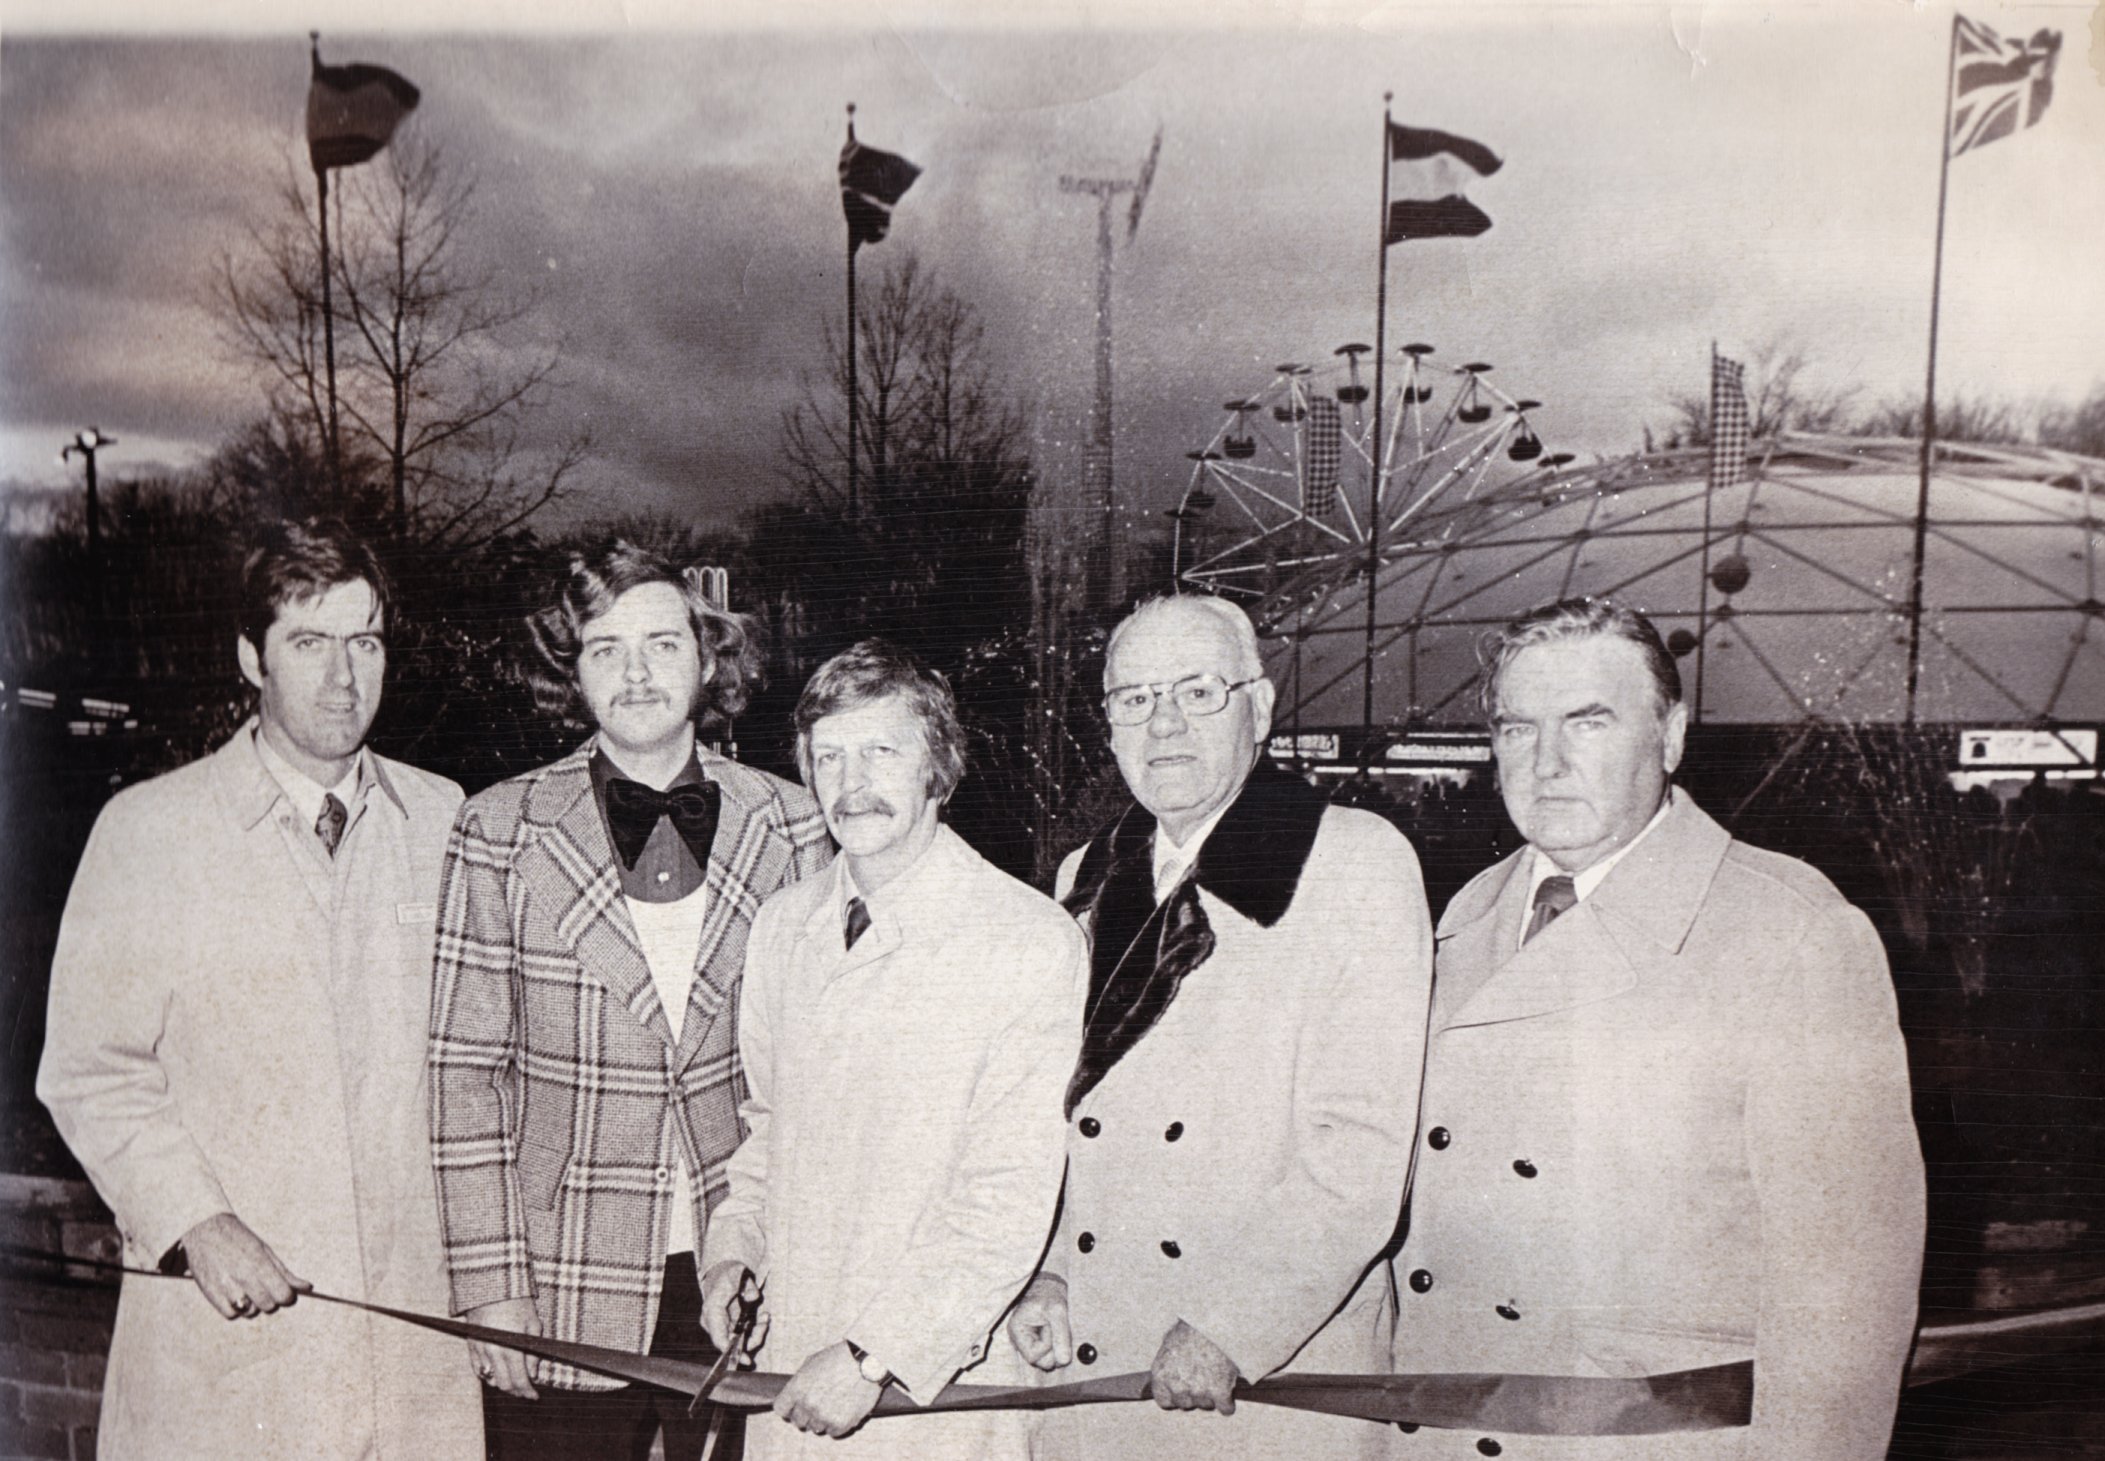 April 8, 1974- Agawam - The new International Plaza is opened at Riverside Park. Participated in the ribbon-cutting ceremonies are, left to right, Edward J. Carroll Jr., assistant general manager at Riverside, Agawm Town Councillor Joseph DellaGuistina, James D. Westman, town manager, Edward J. Carroll, owner of Riverside and Edmund Coffey, Agawam town councilor.